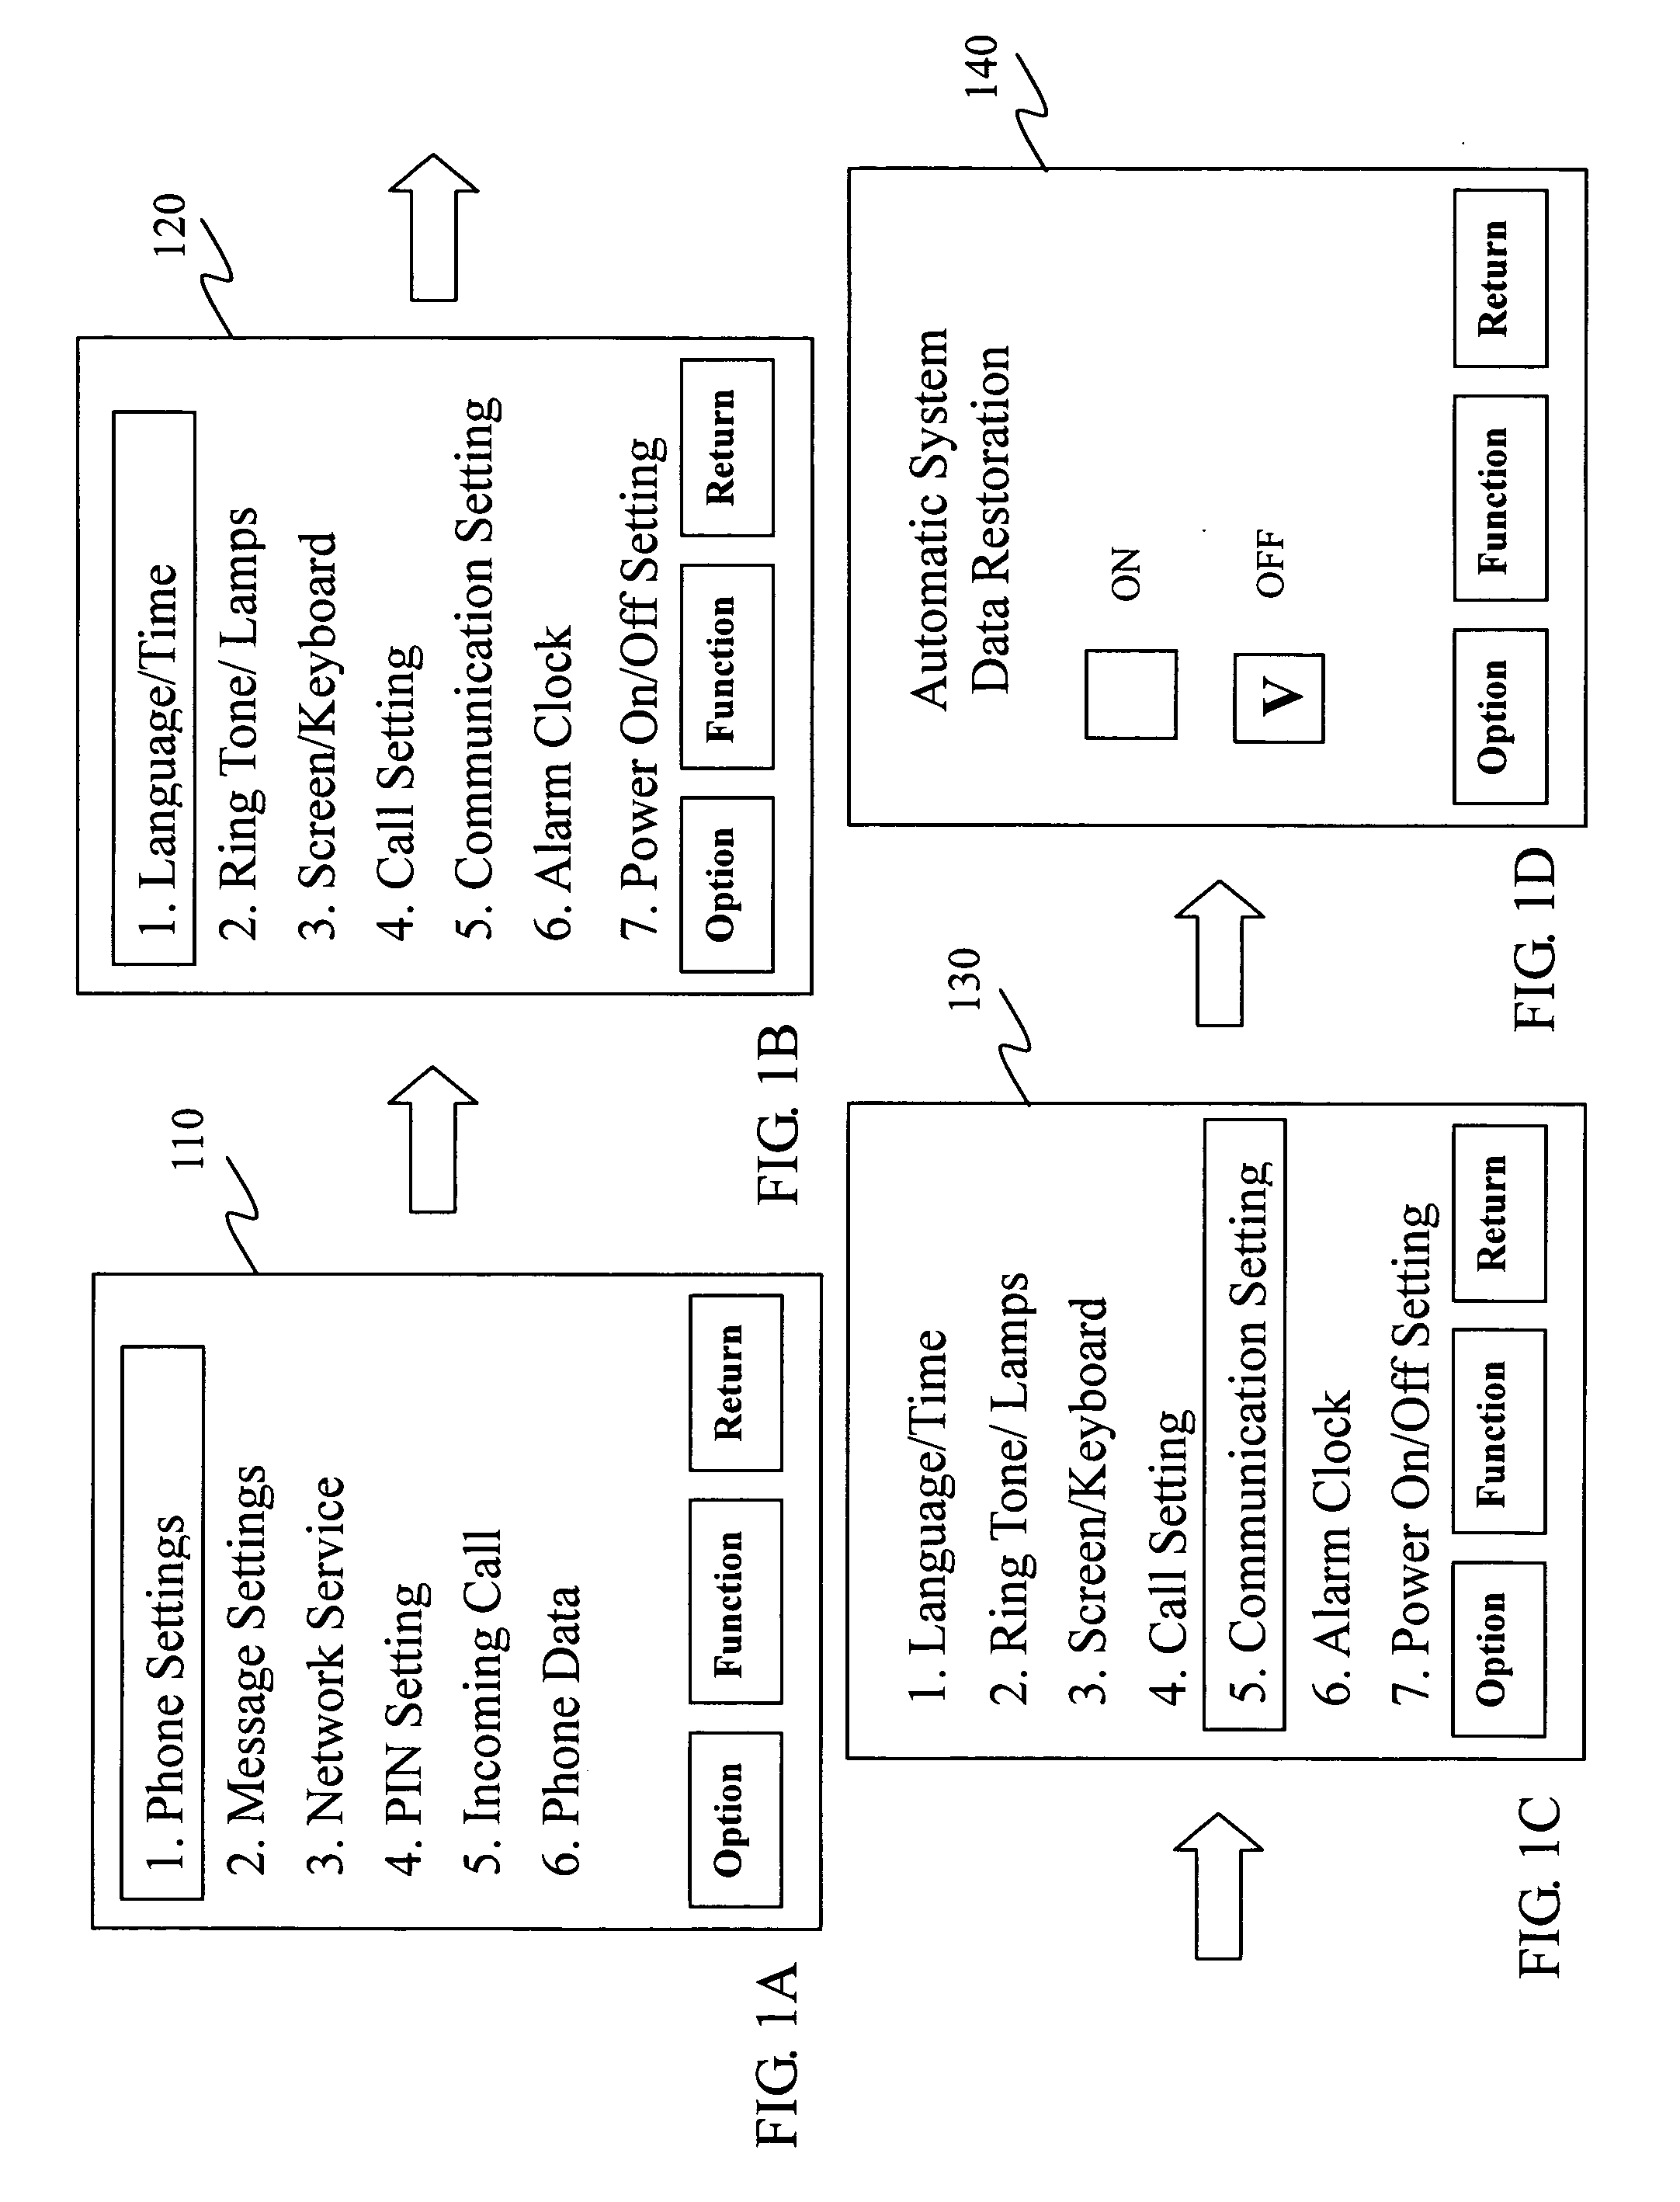 Method for restoring automatically an original setting in a mobile device